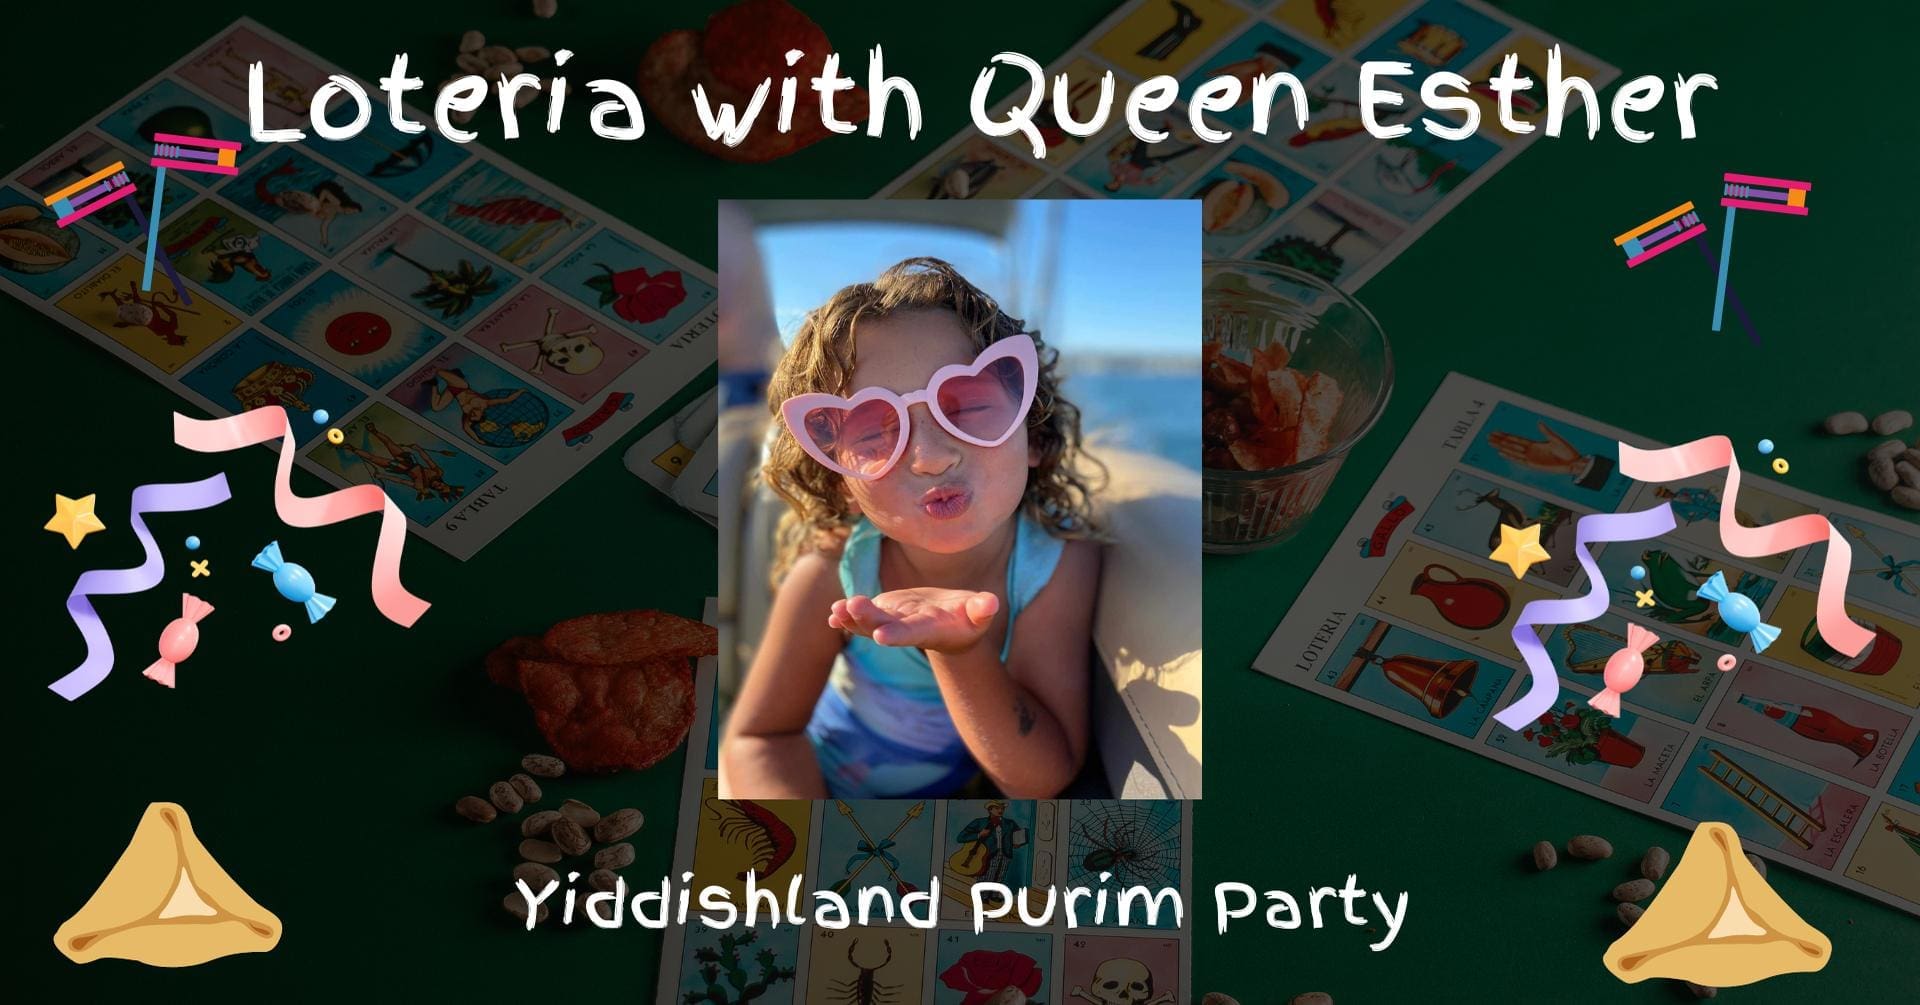 2nd Event Lotería With Queen Esther An Exclusive Yiddishland Purim Fusion Event